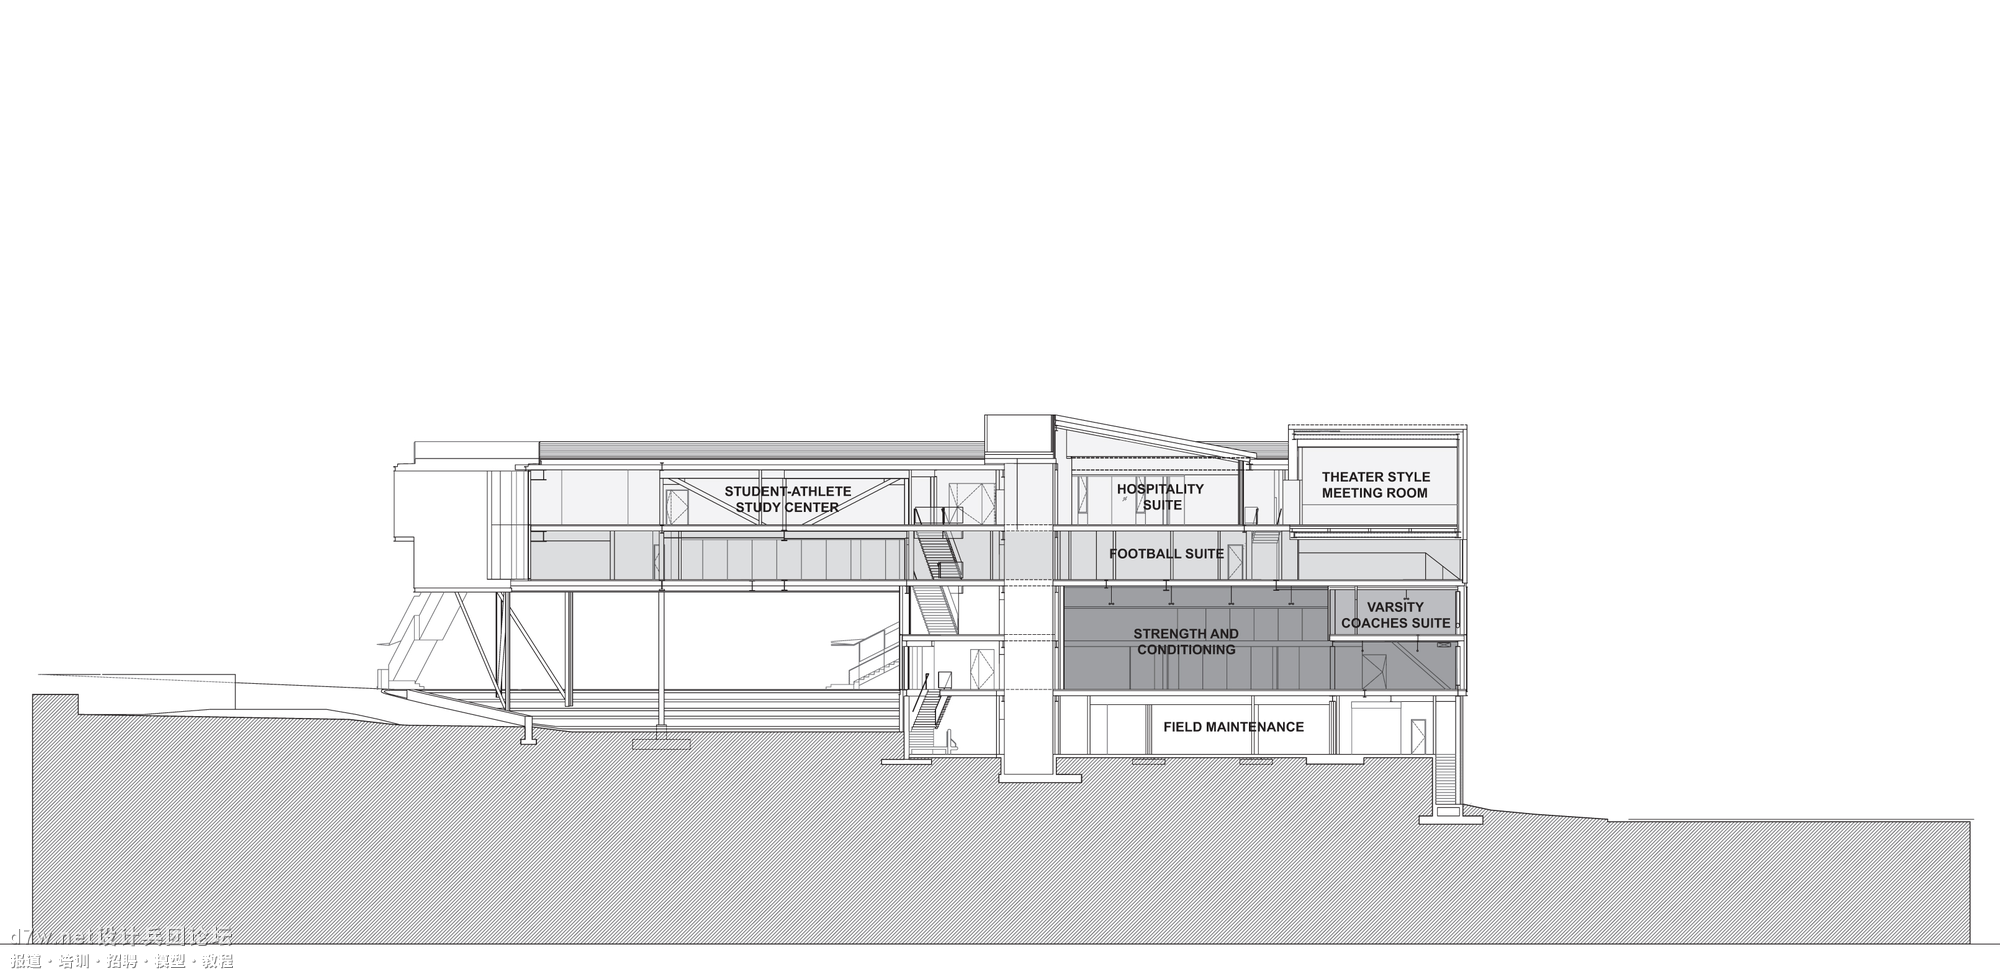 518bcf6ab3fc4b7efc00001e_campbell-sports-center-steven-holl-architects_section.png